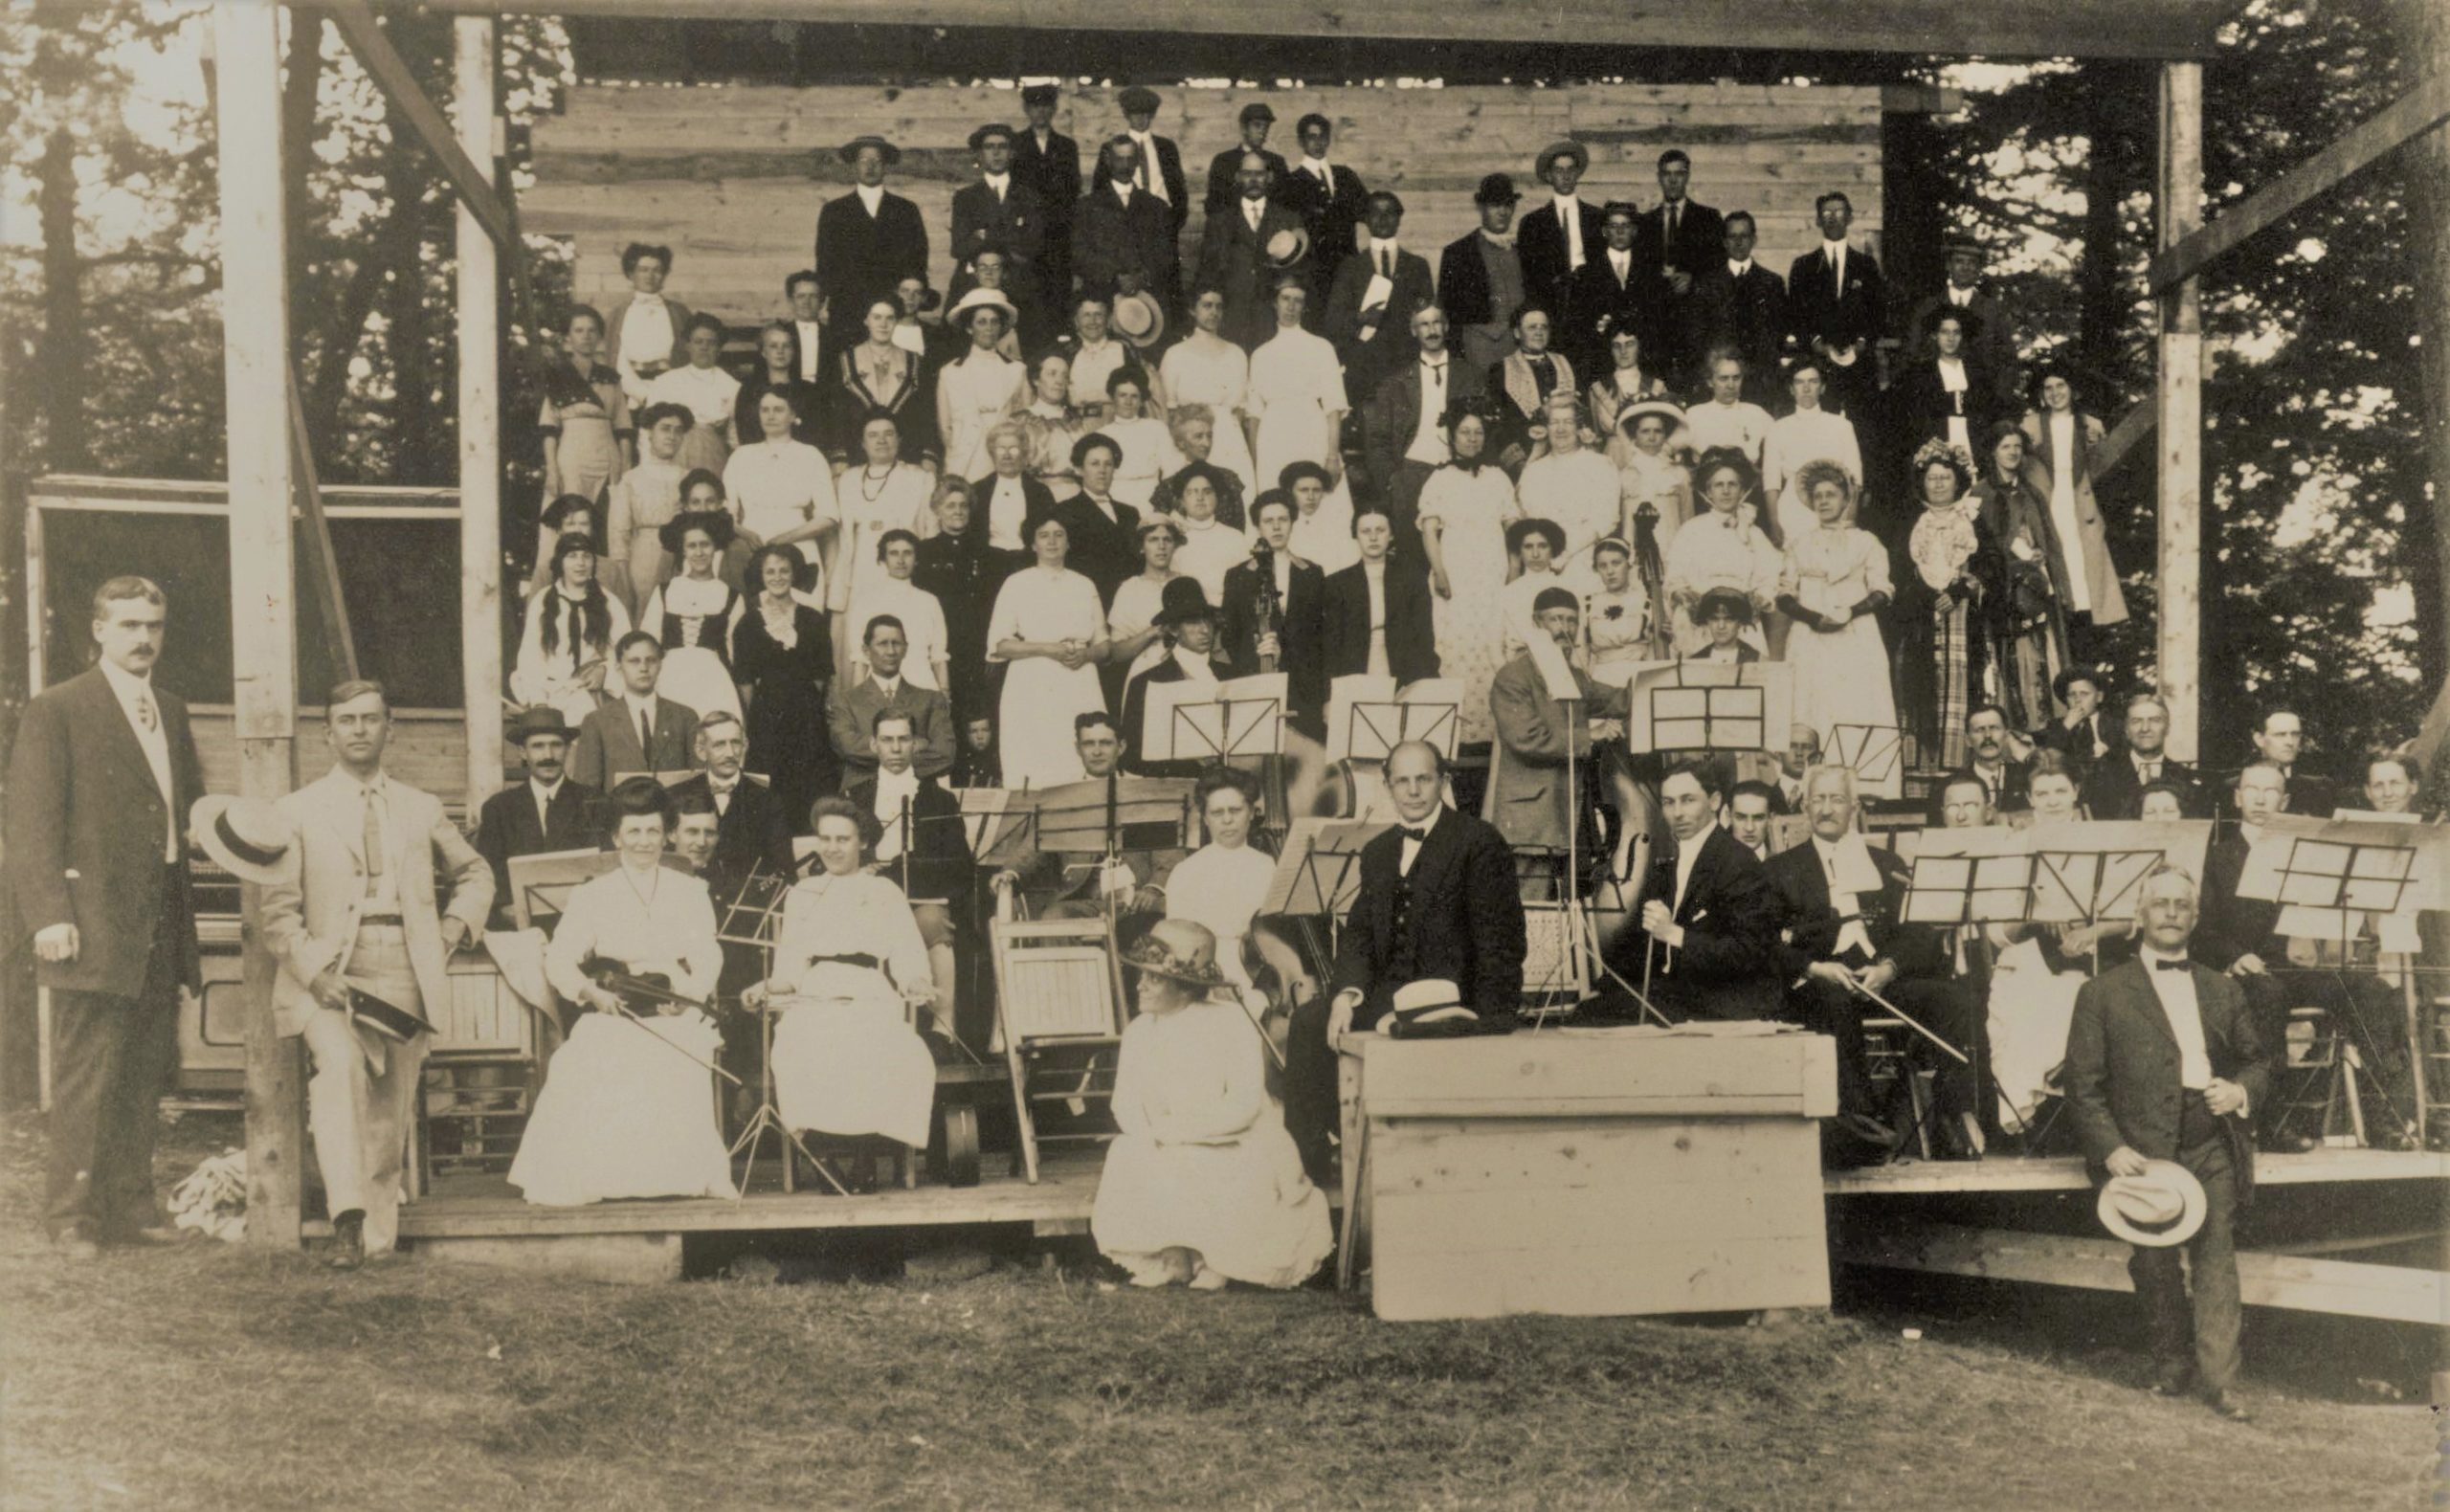 Farwell with St Johnsbury Pageant cast 1912